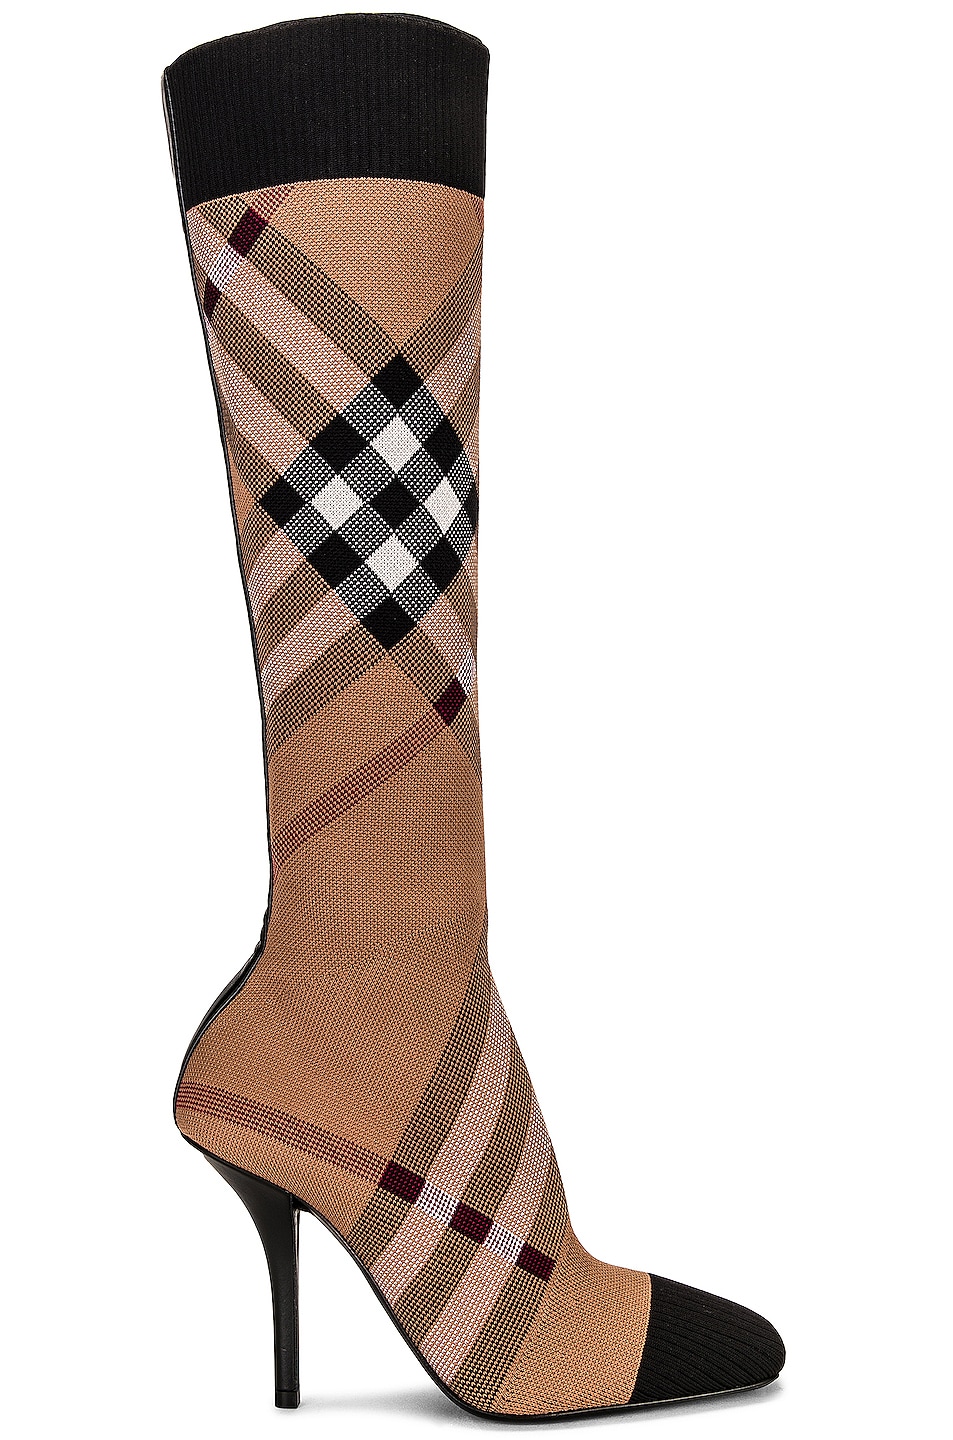 Image 1 of Burberry Dolman Check Knee High Boots in Birch Brown IP Check